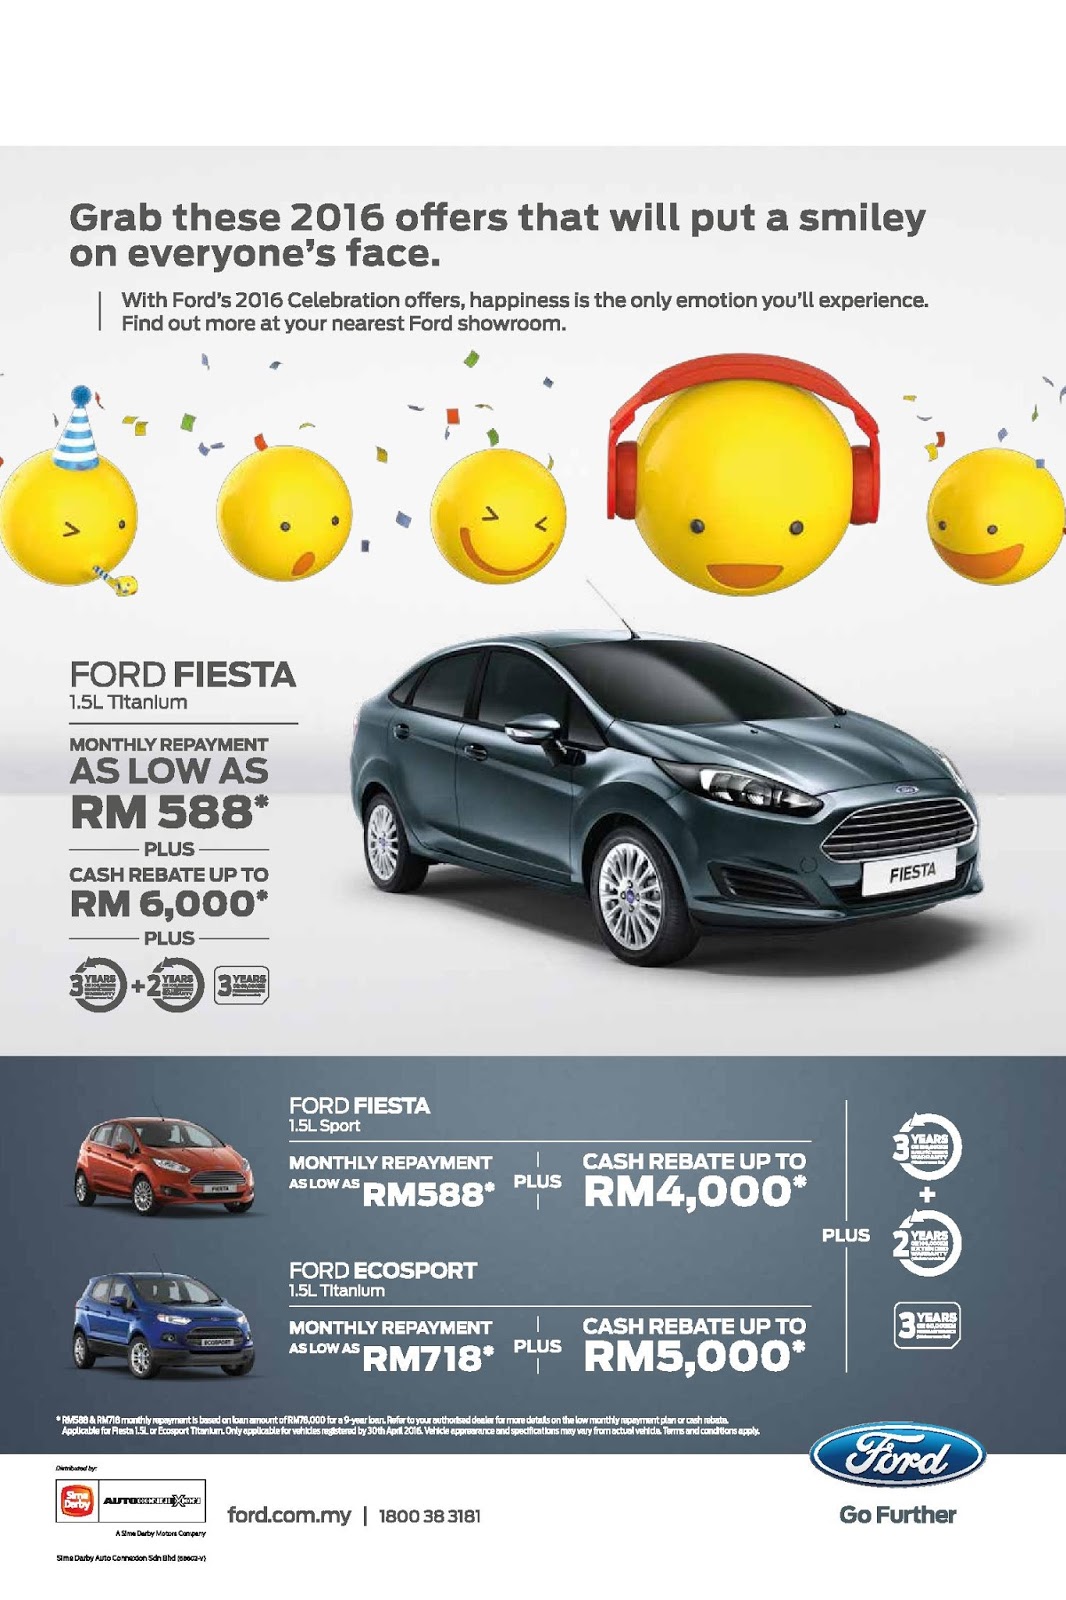 motoring-malaysia-sime-darby-auto-connexion-offers-ford-ecosport-ford